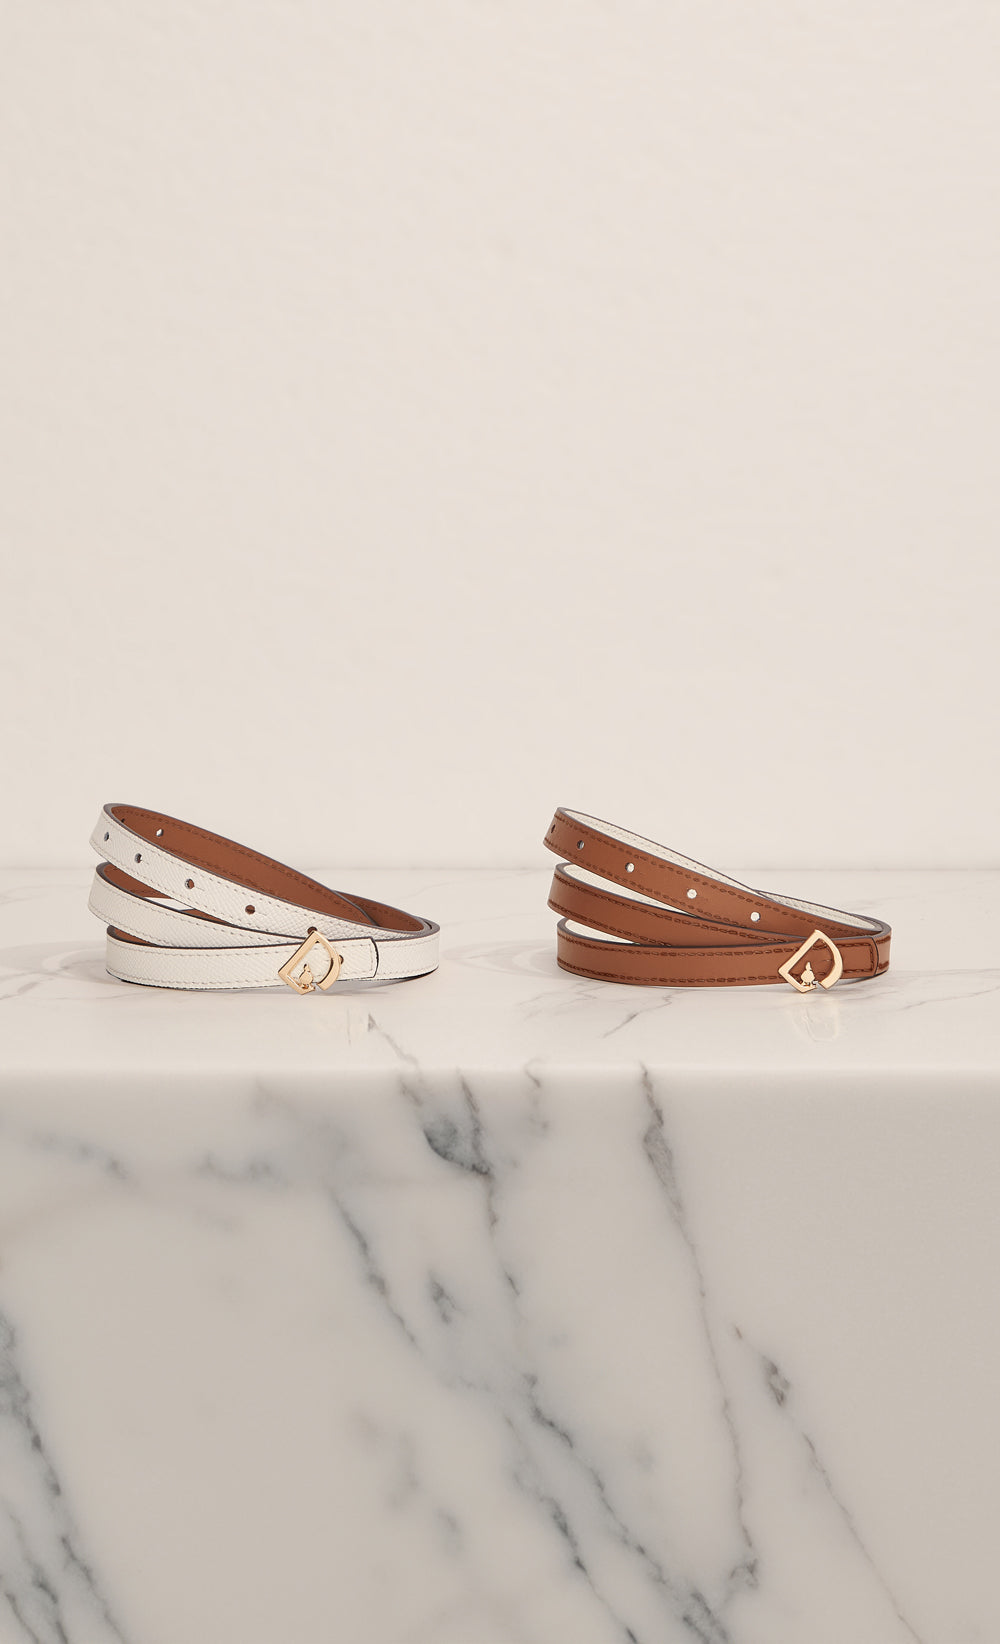 The Classic Reversible D Belt in White & Brown